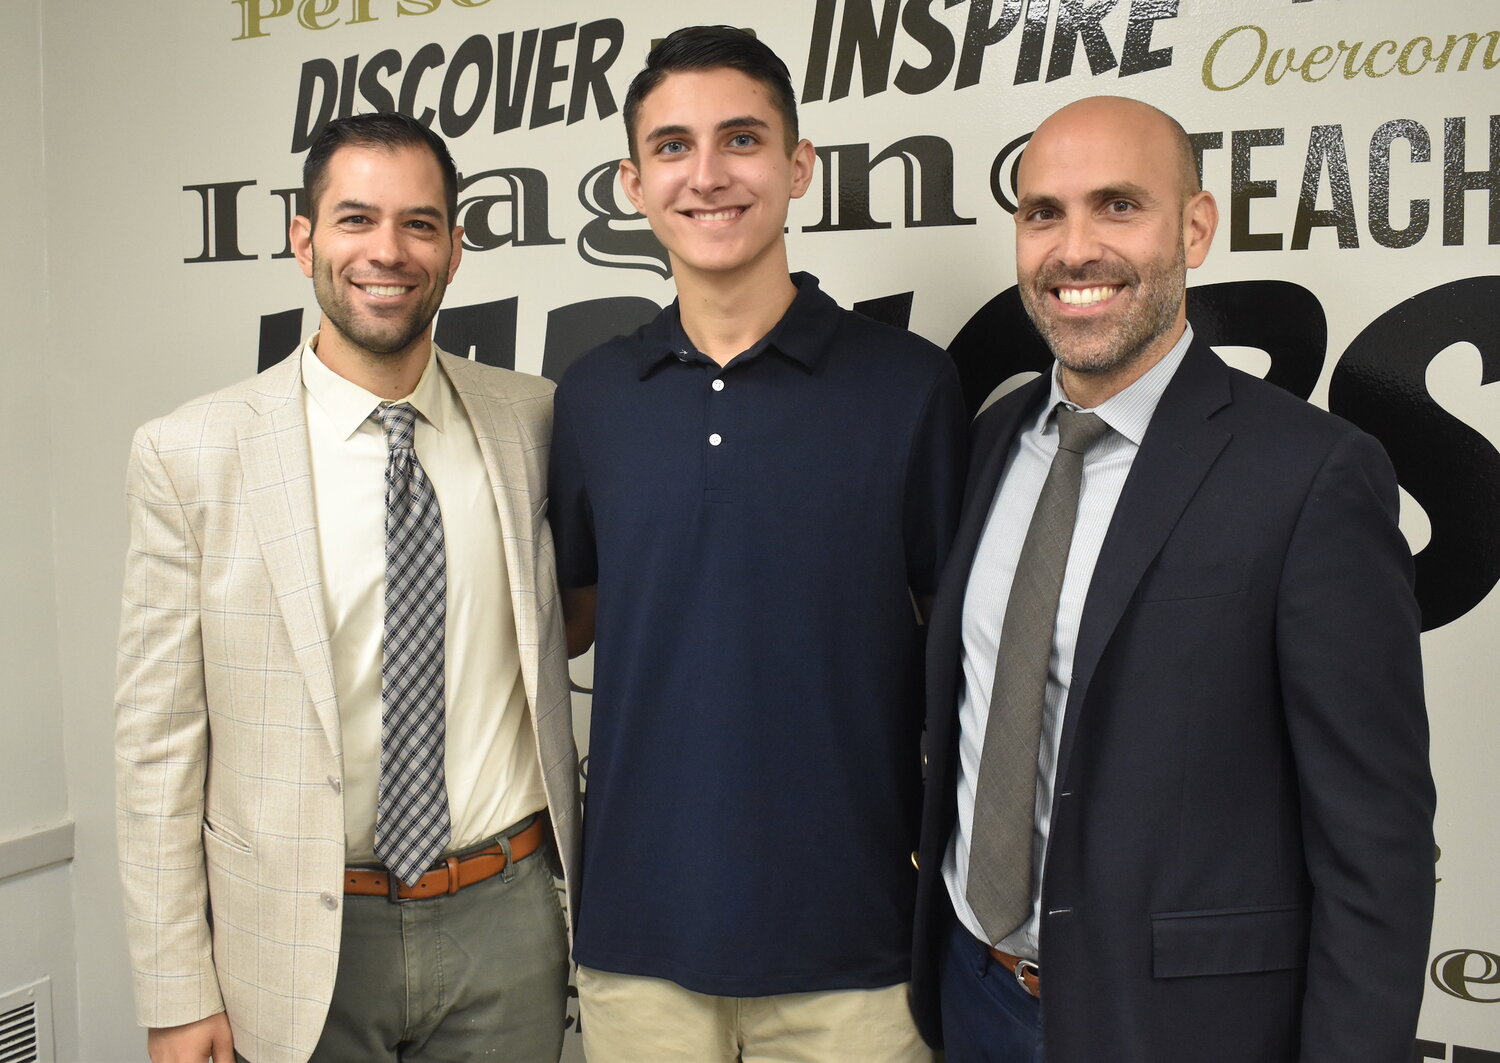 James Tullo was congratulated for his achievement by Principal Paul Guzzone, left, and Assistant Principal Nick Pappas.